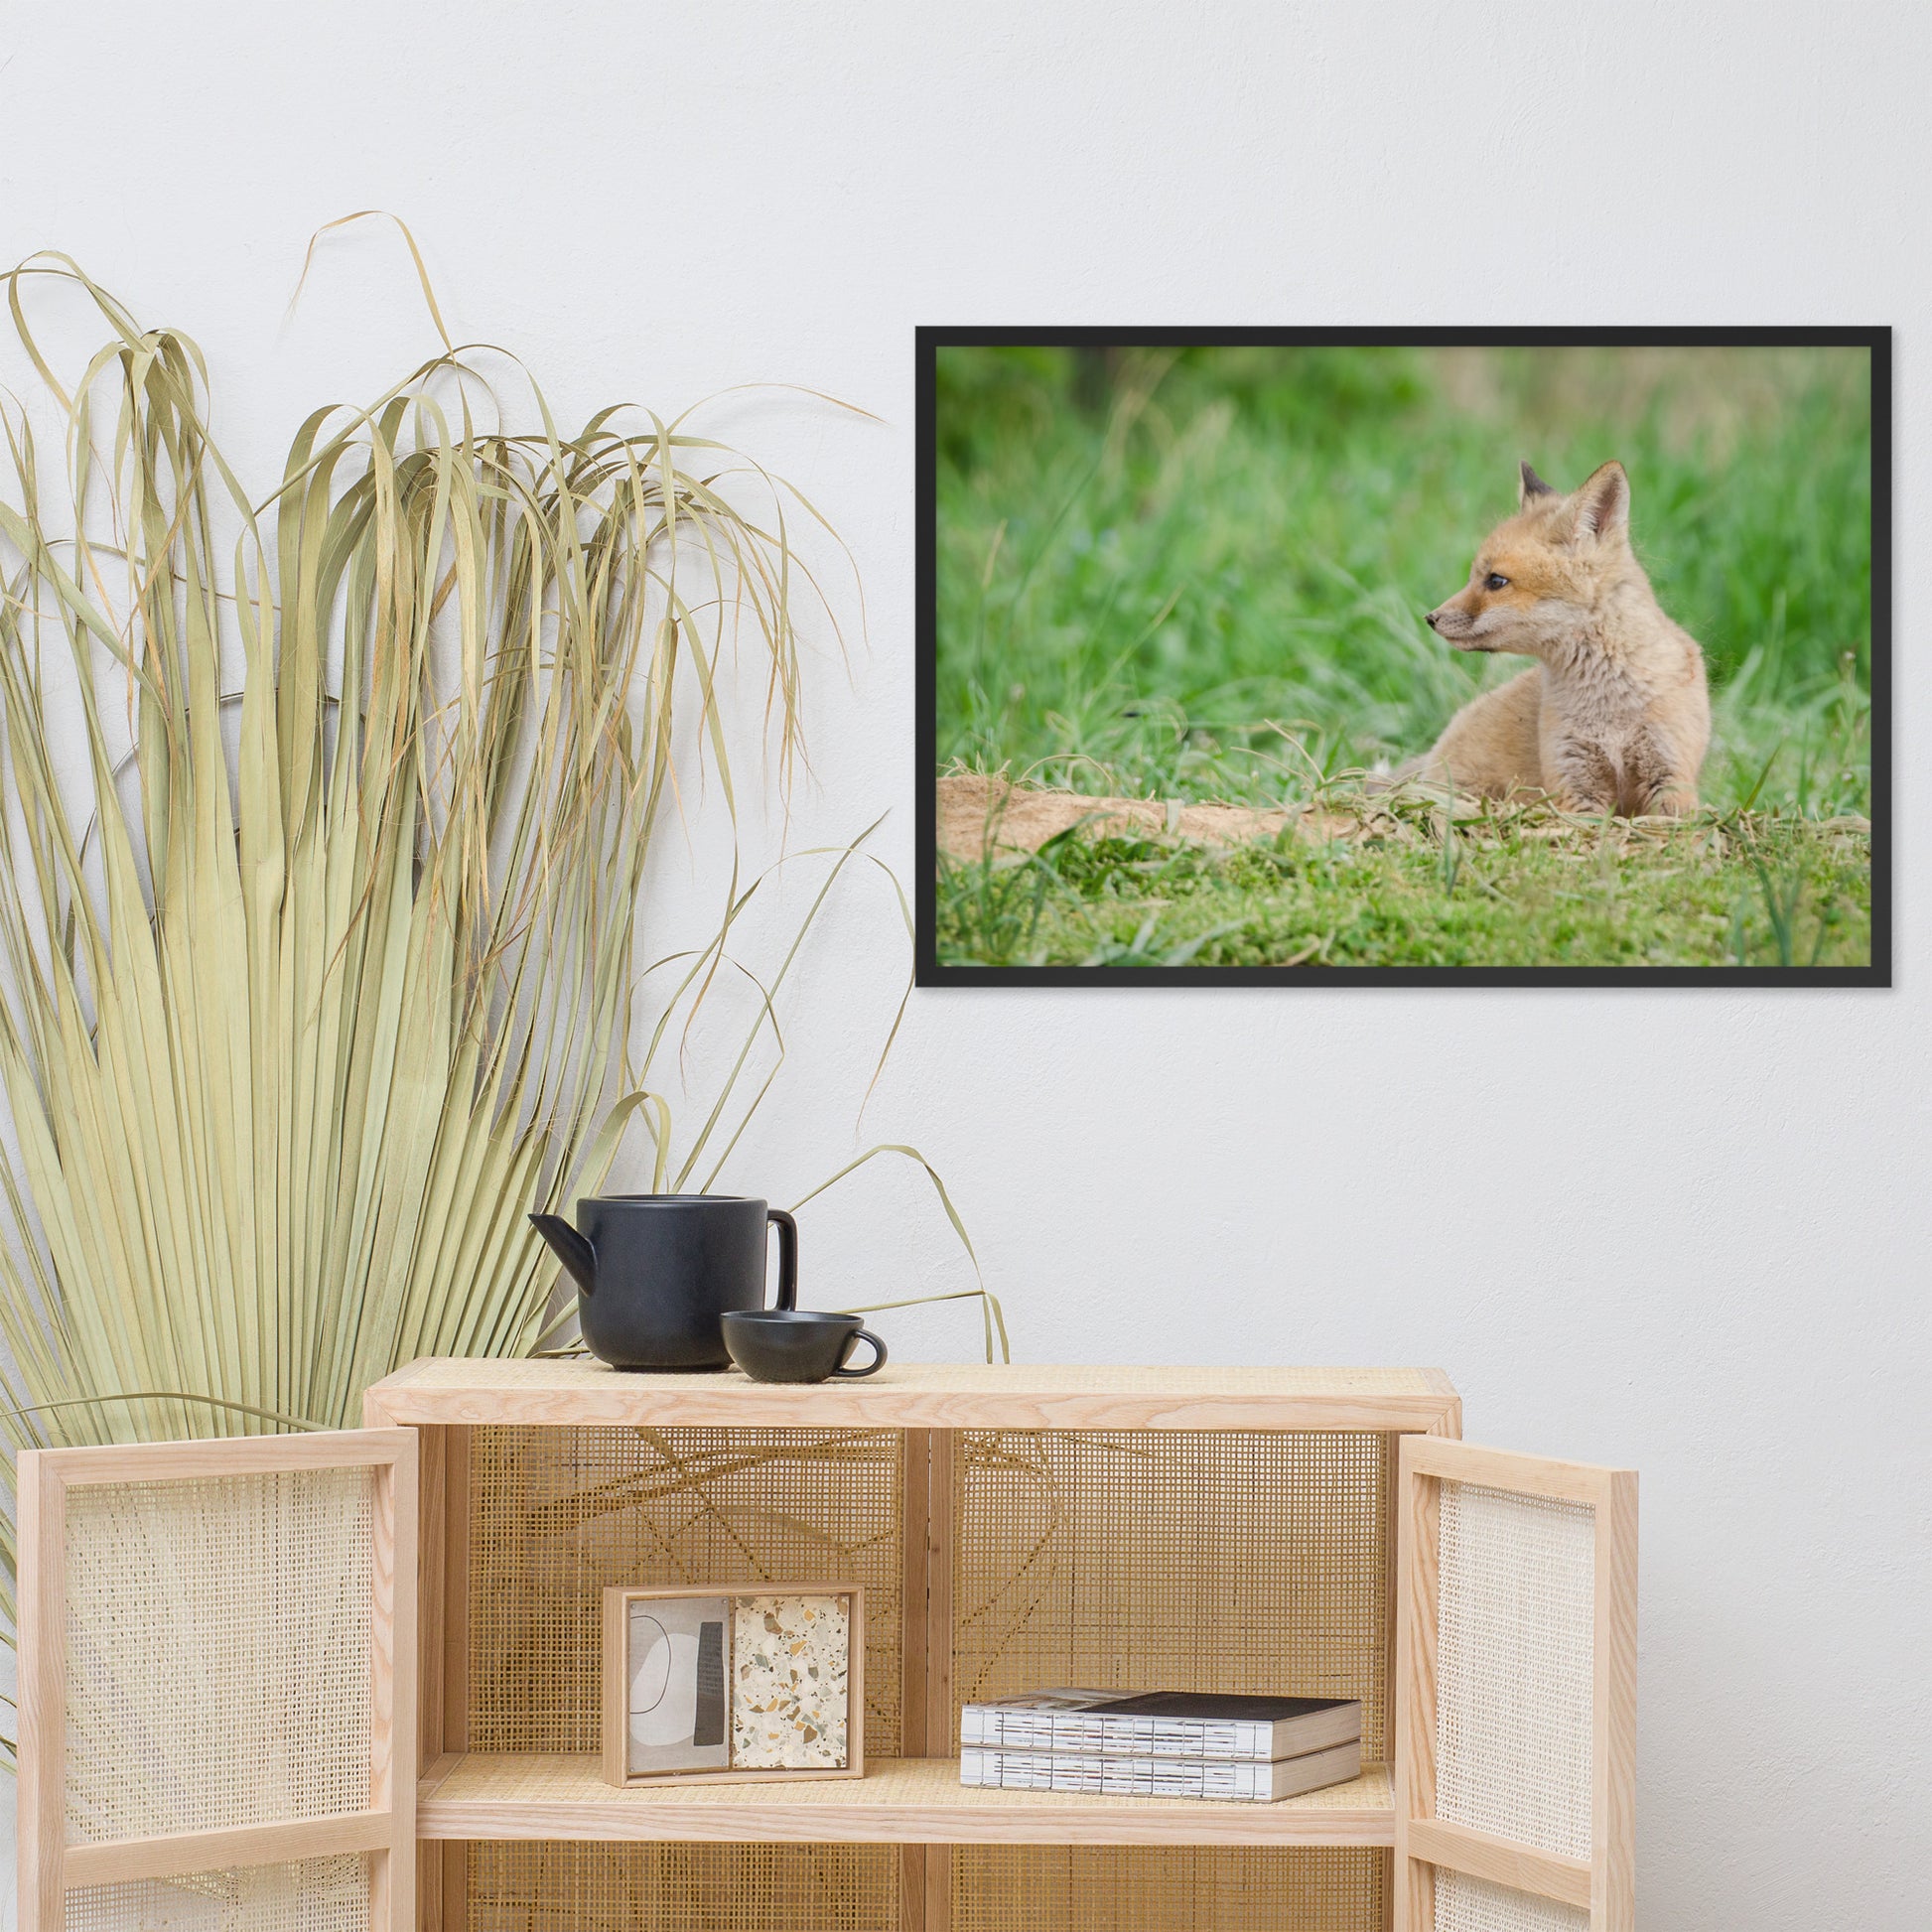 Wildlife Framed Pictures: Red Fox Pups - Chilling/ Animal / Wildlife / Nature Photographic Artwork - Framed Artwork - Wall Decor